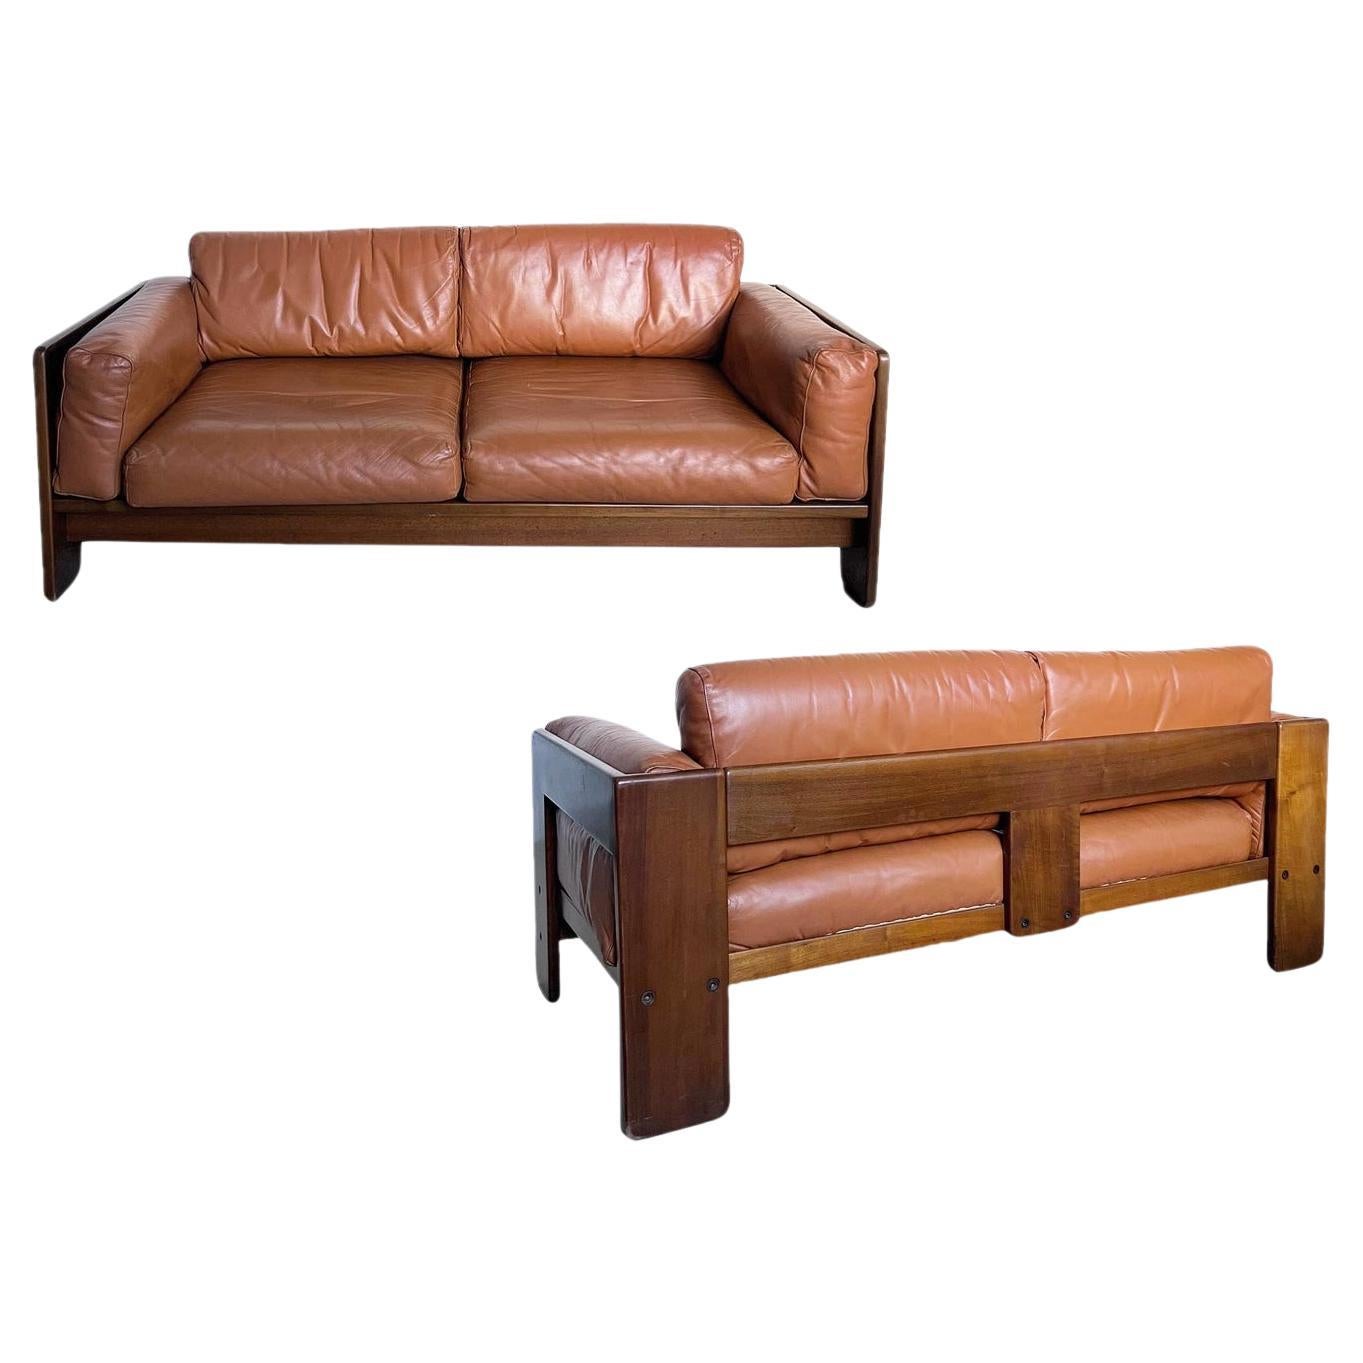 Bastiano Sofa by Afra and Tobia Scarpa - Set of Two - Italian Mid Century Modern